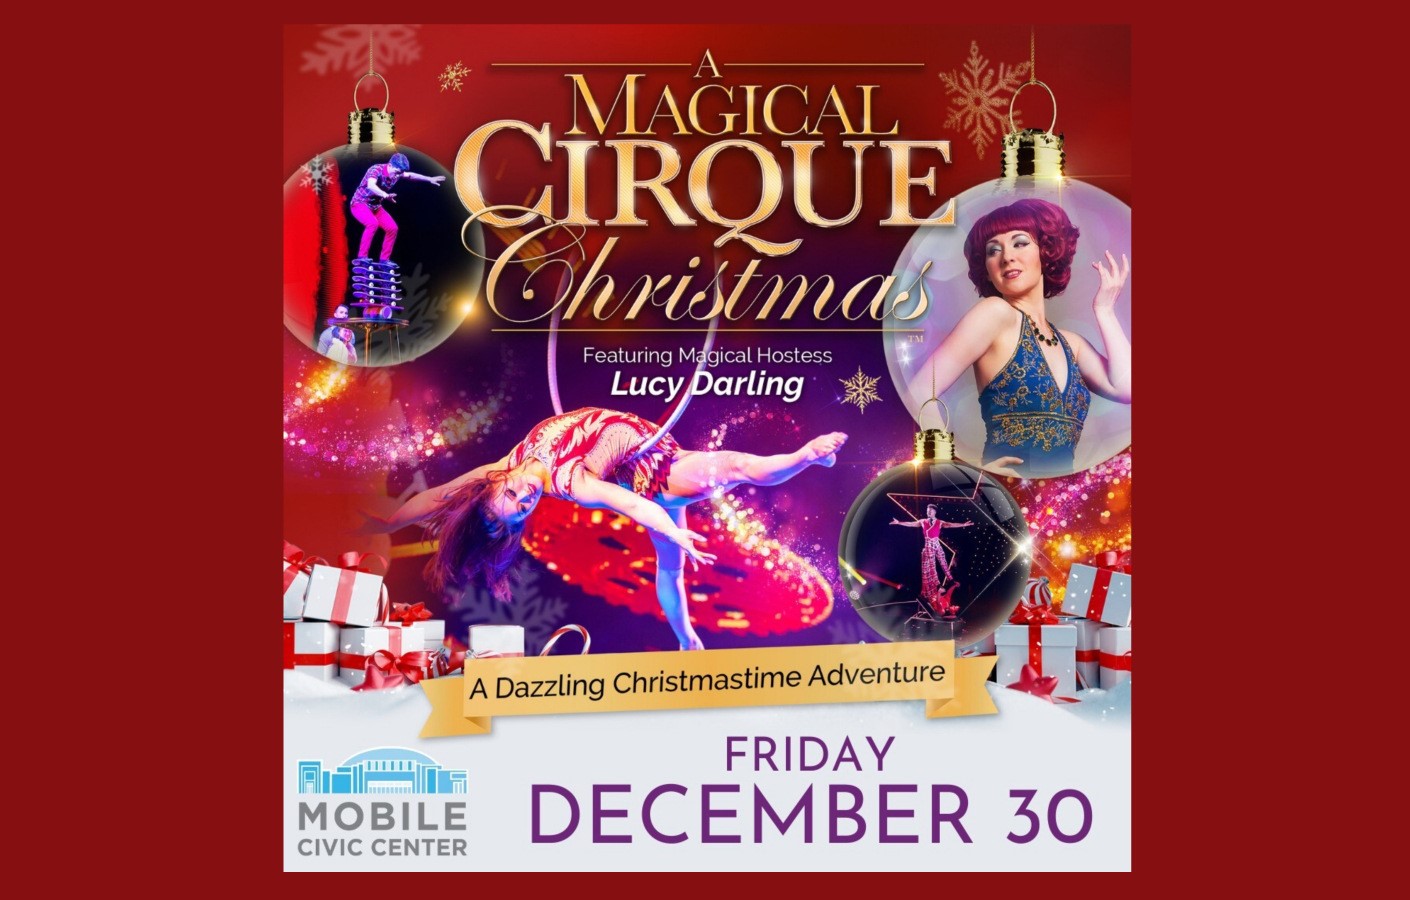 Tickets for our Magic of Christmas season are available online now